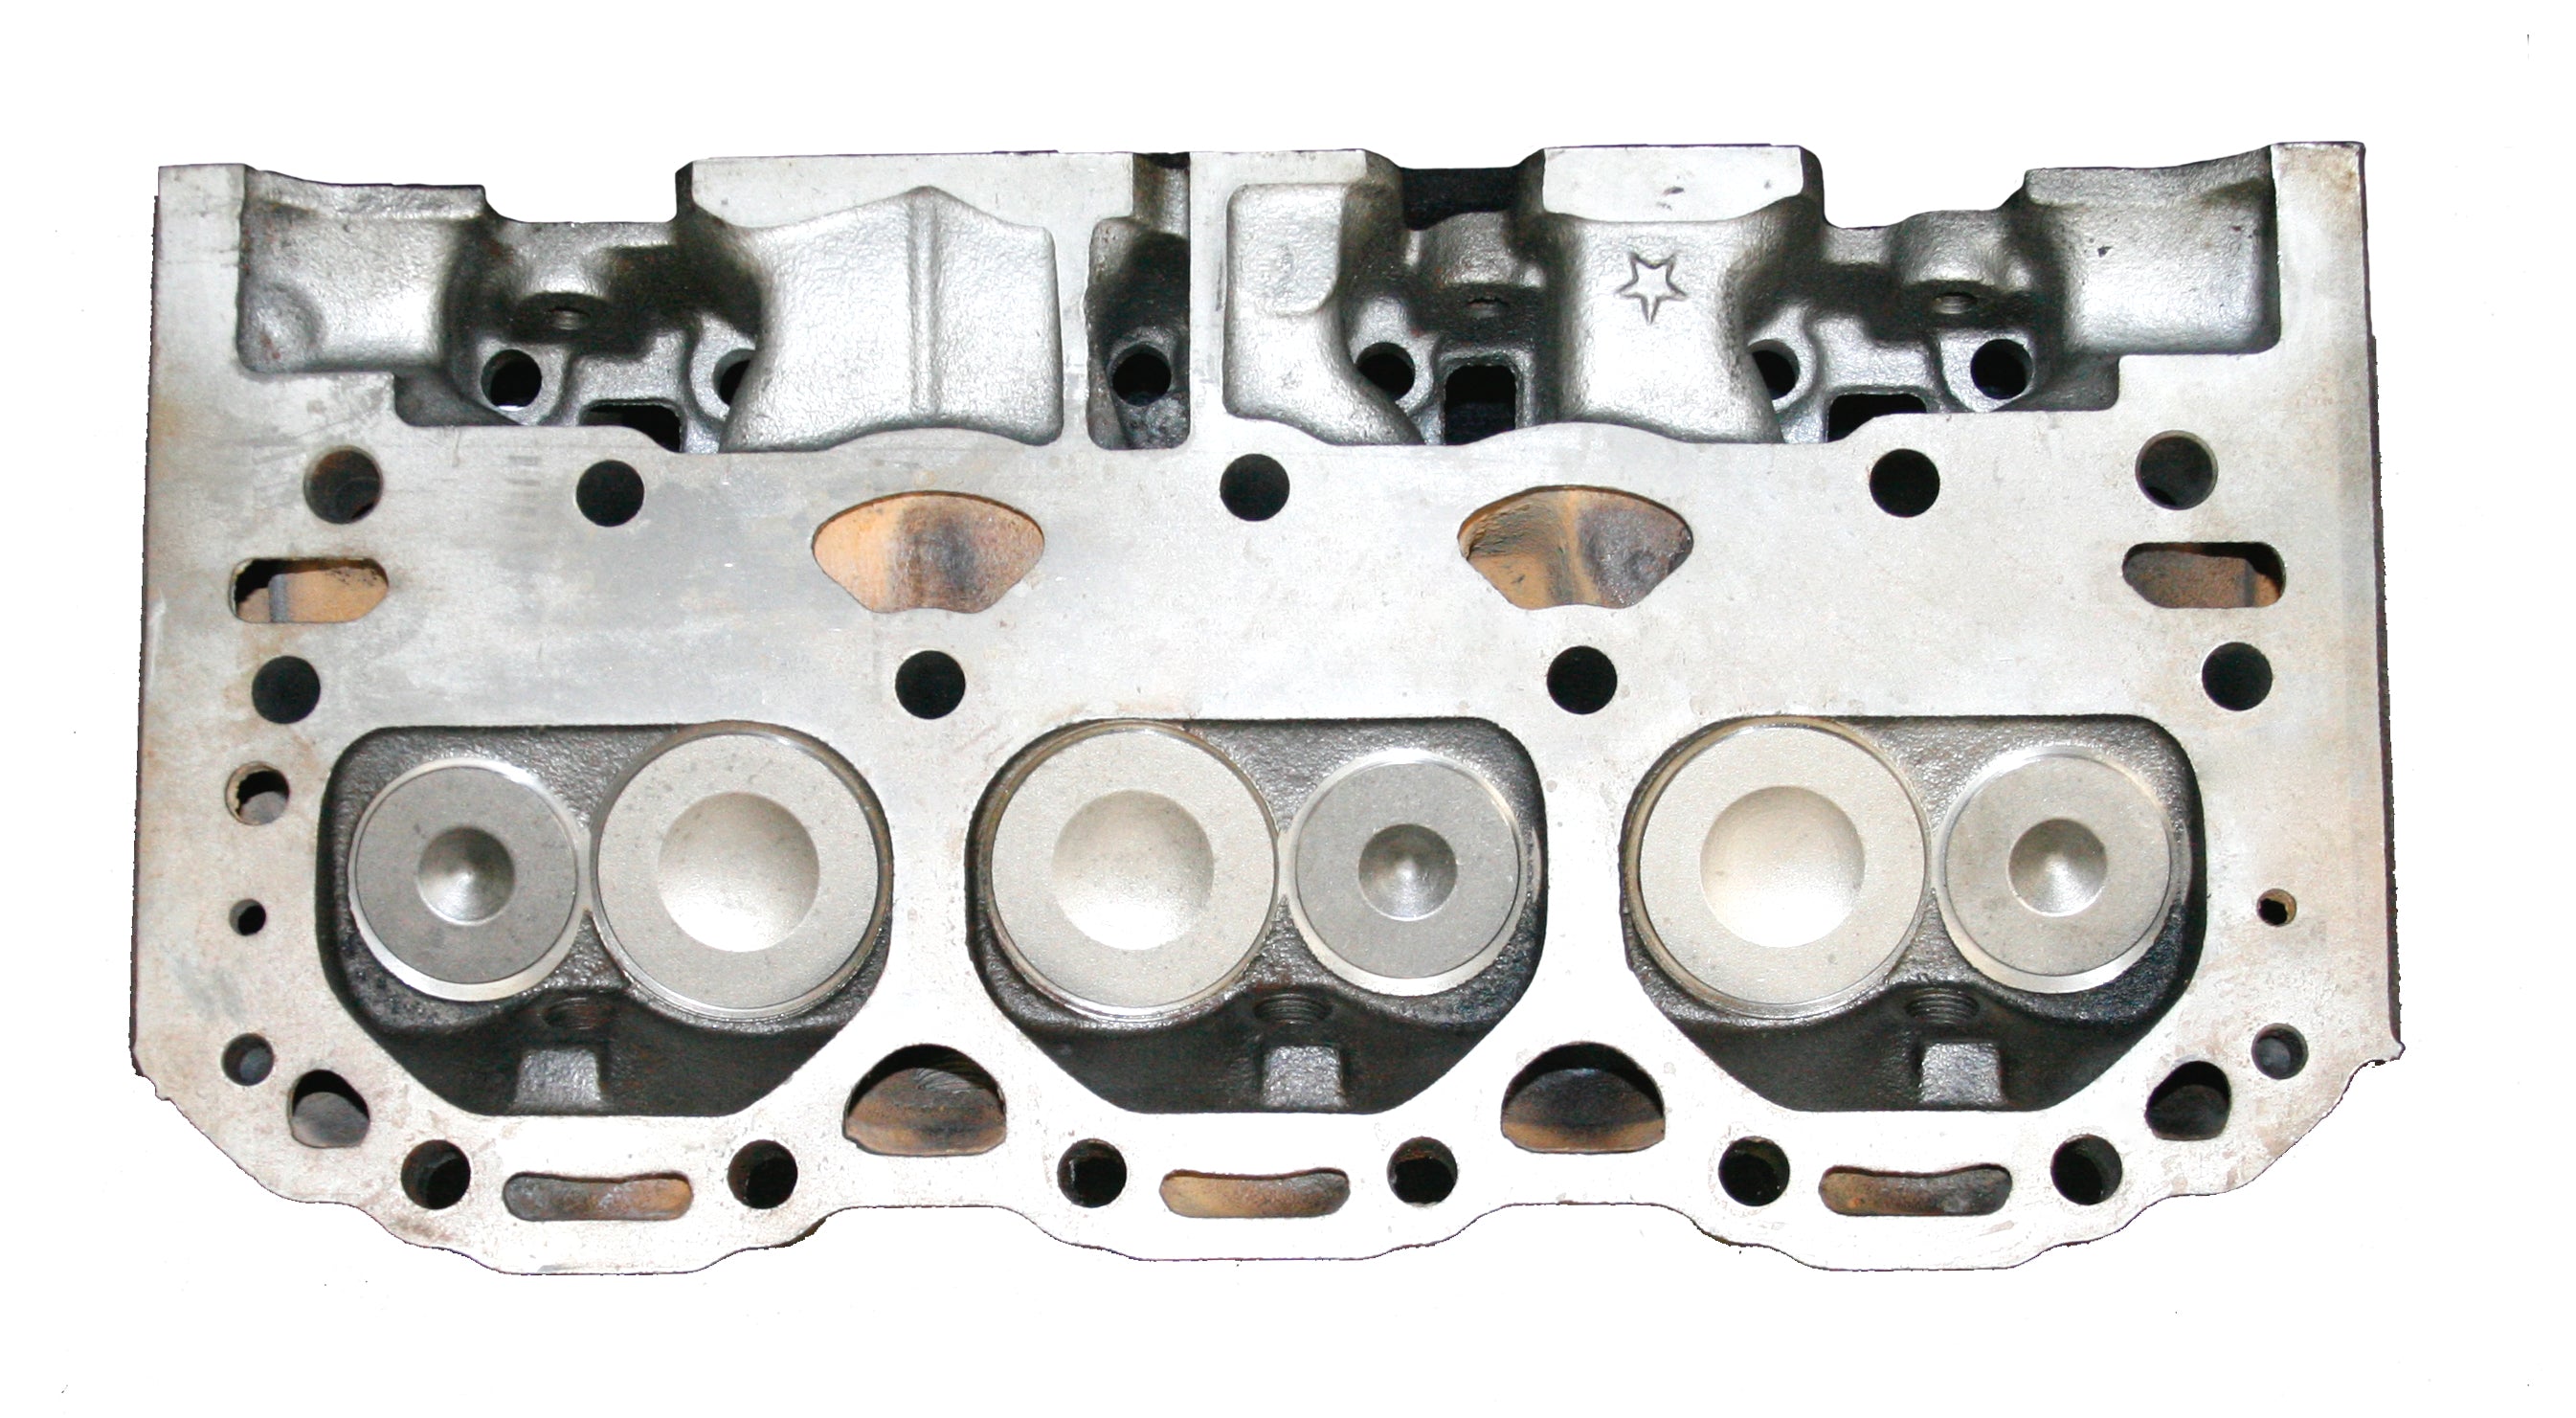 1990-1991 GM Chevy Caprice 4.3L 262 OHV Cylinder head casting # 10144103